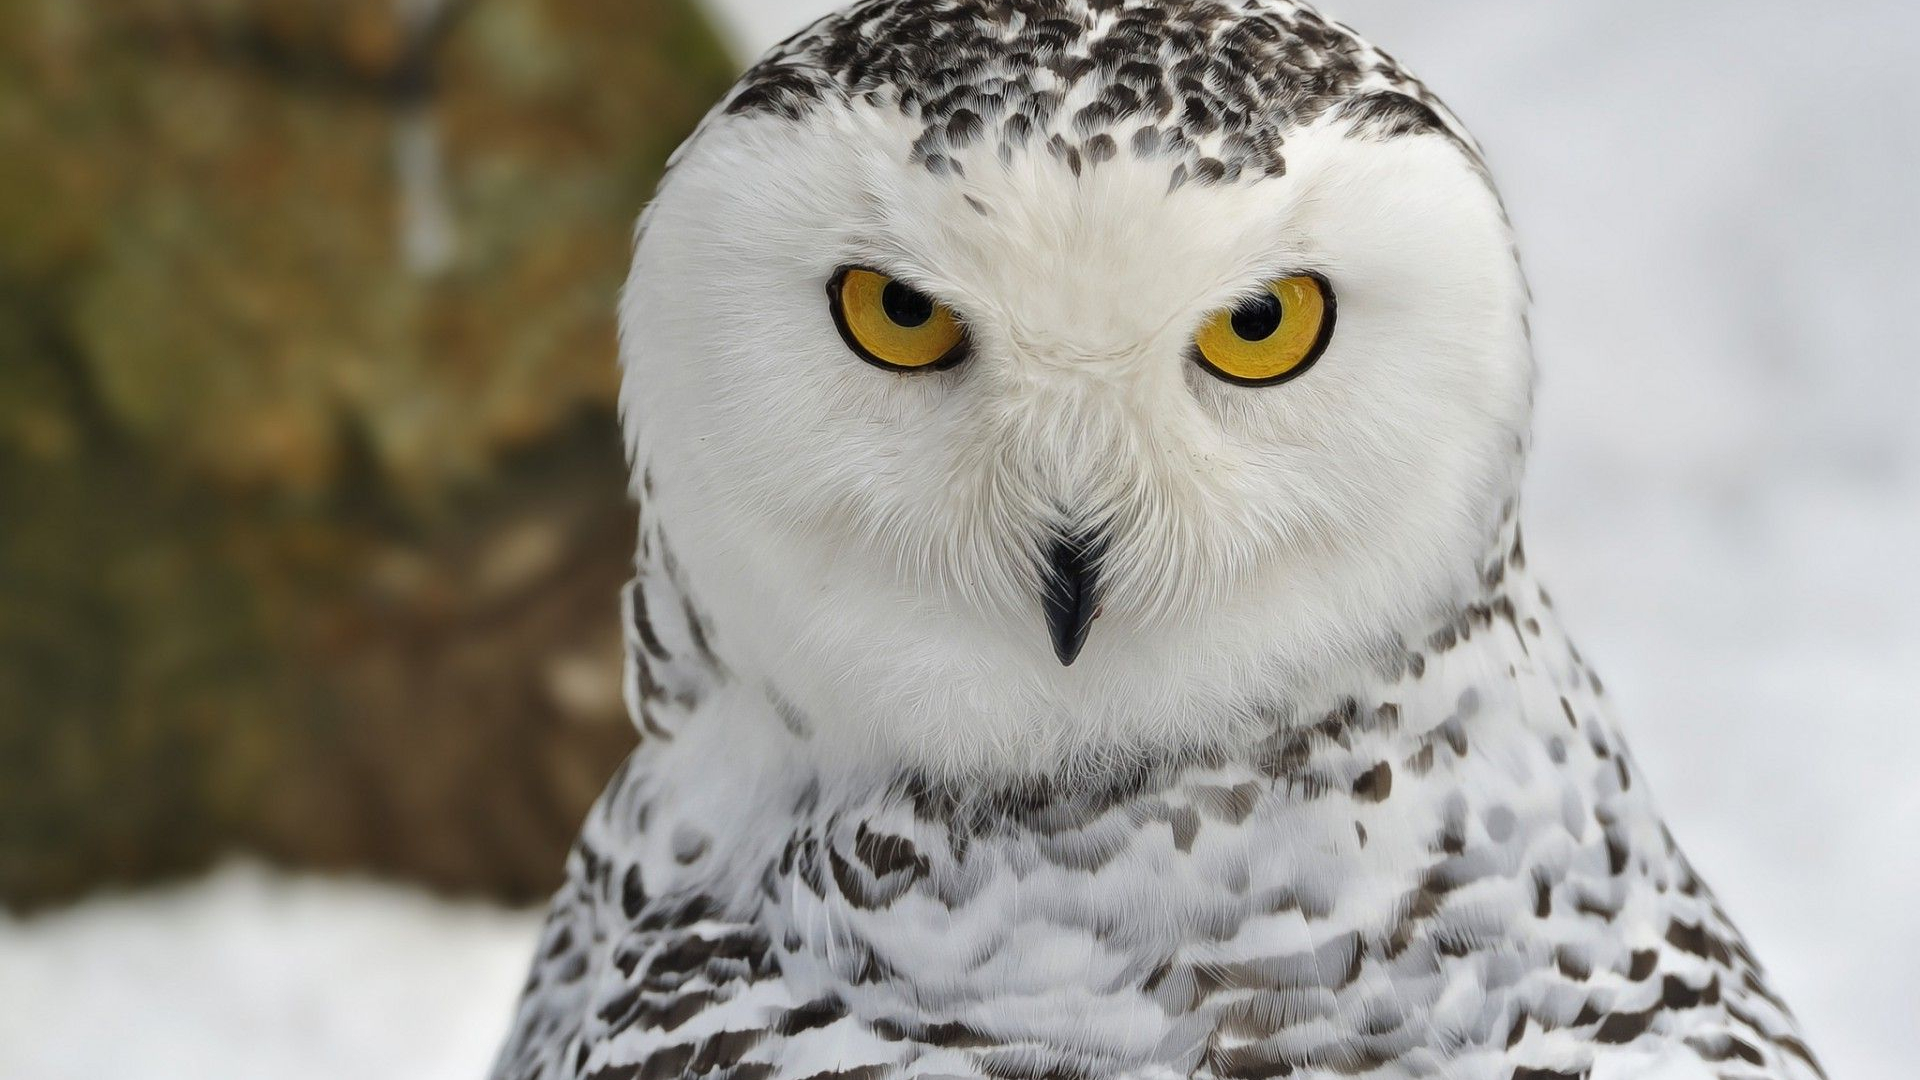 1920x1080 Free download White Owl Wallpapers High Quality Download [1920x1200] for your Desktop, Mobile \u0026 Tablet | Explore 71+ White Owl Wallpaper | Owl Wallpaper for Kids Desktop, Snowy Owl Wallpapers, Owls Wallpaper Desktop